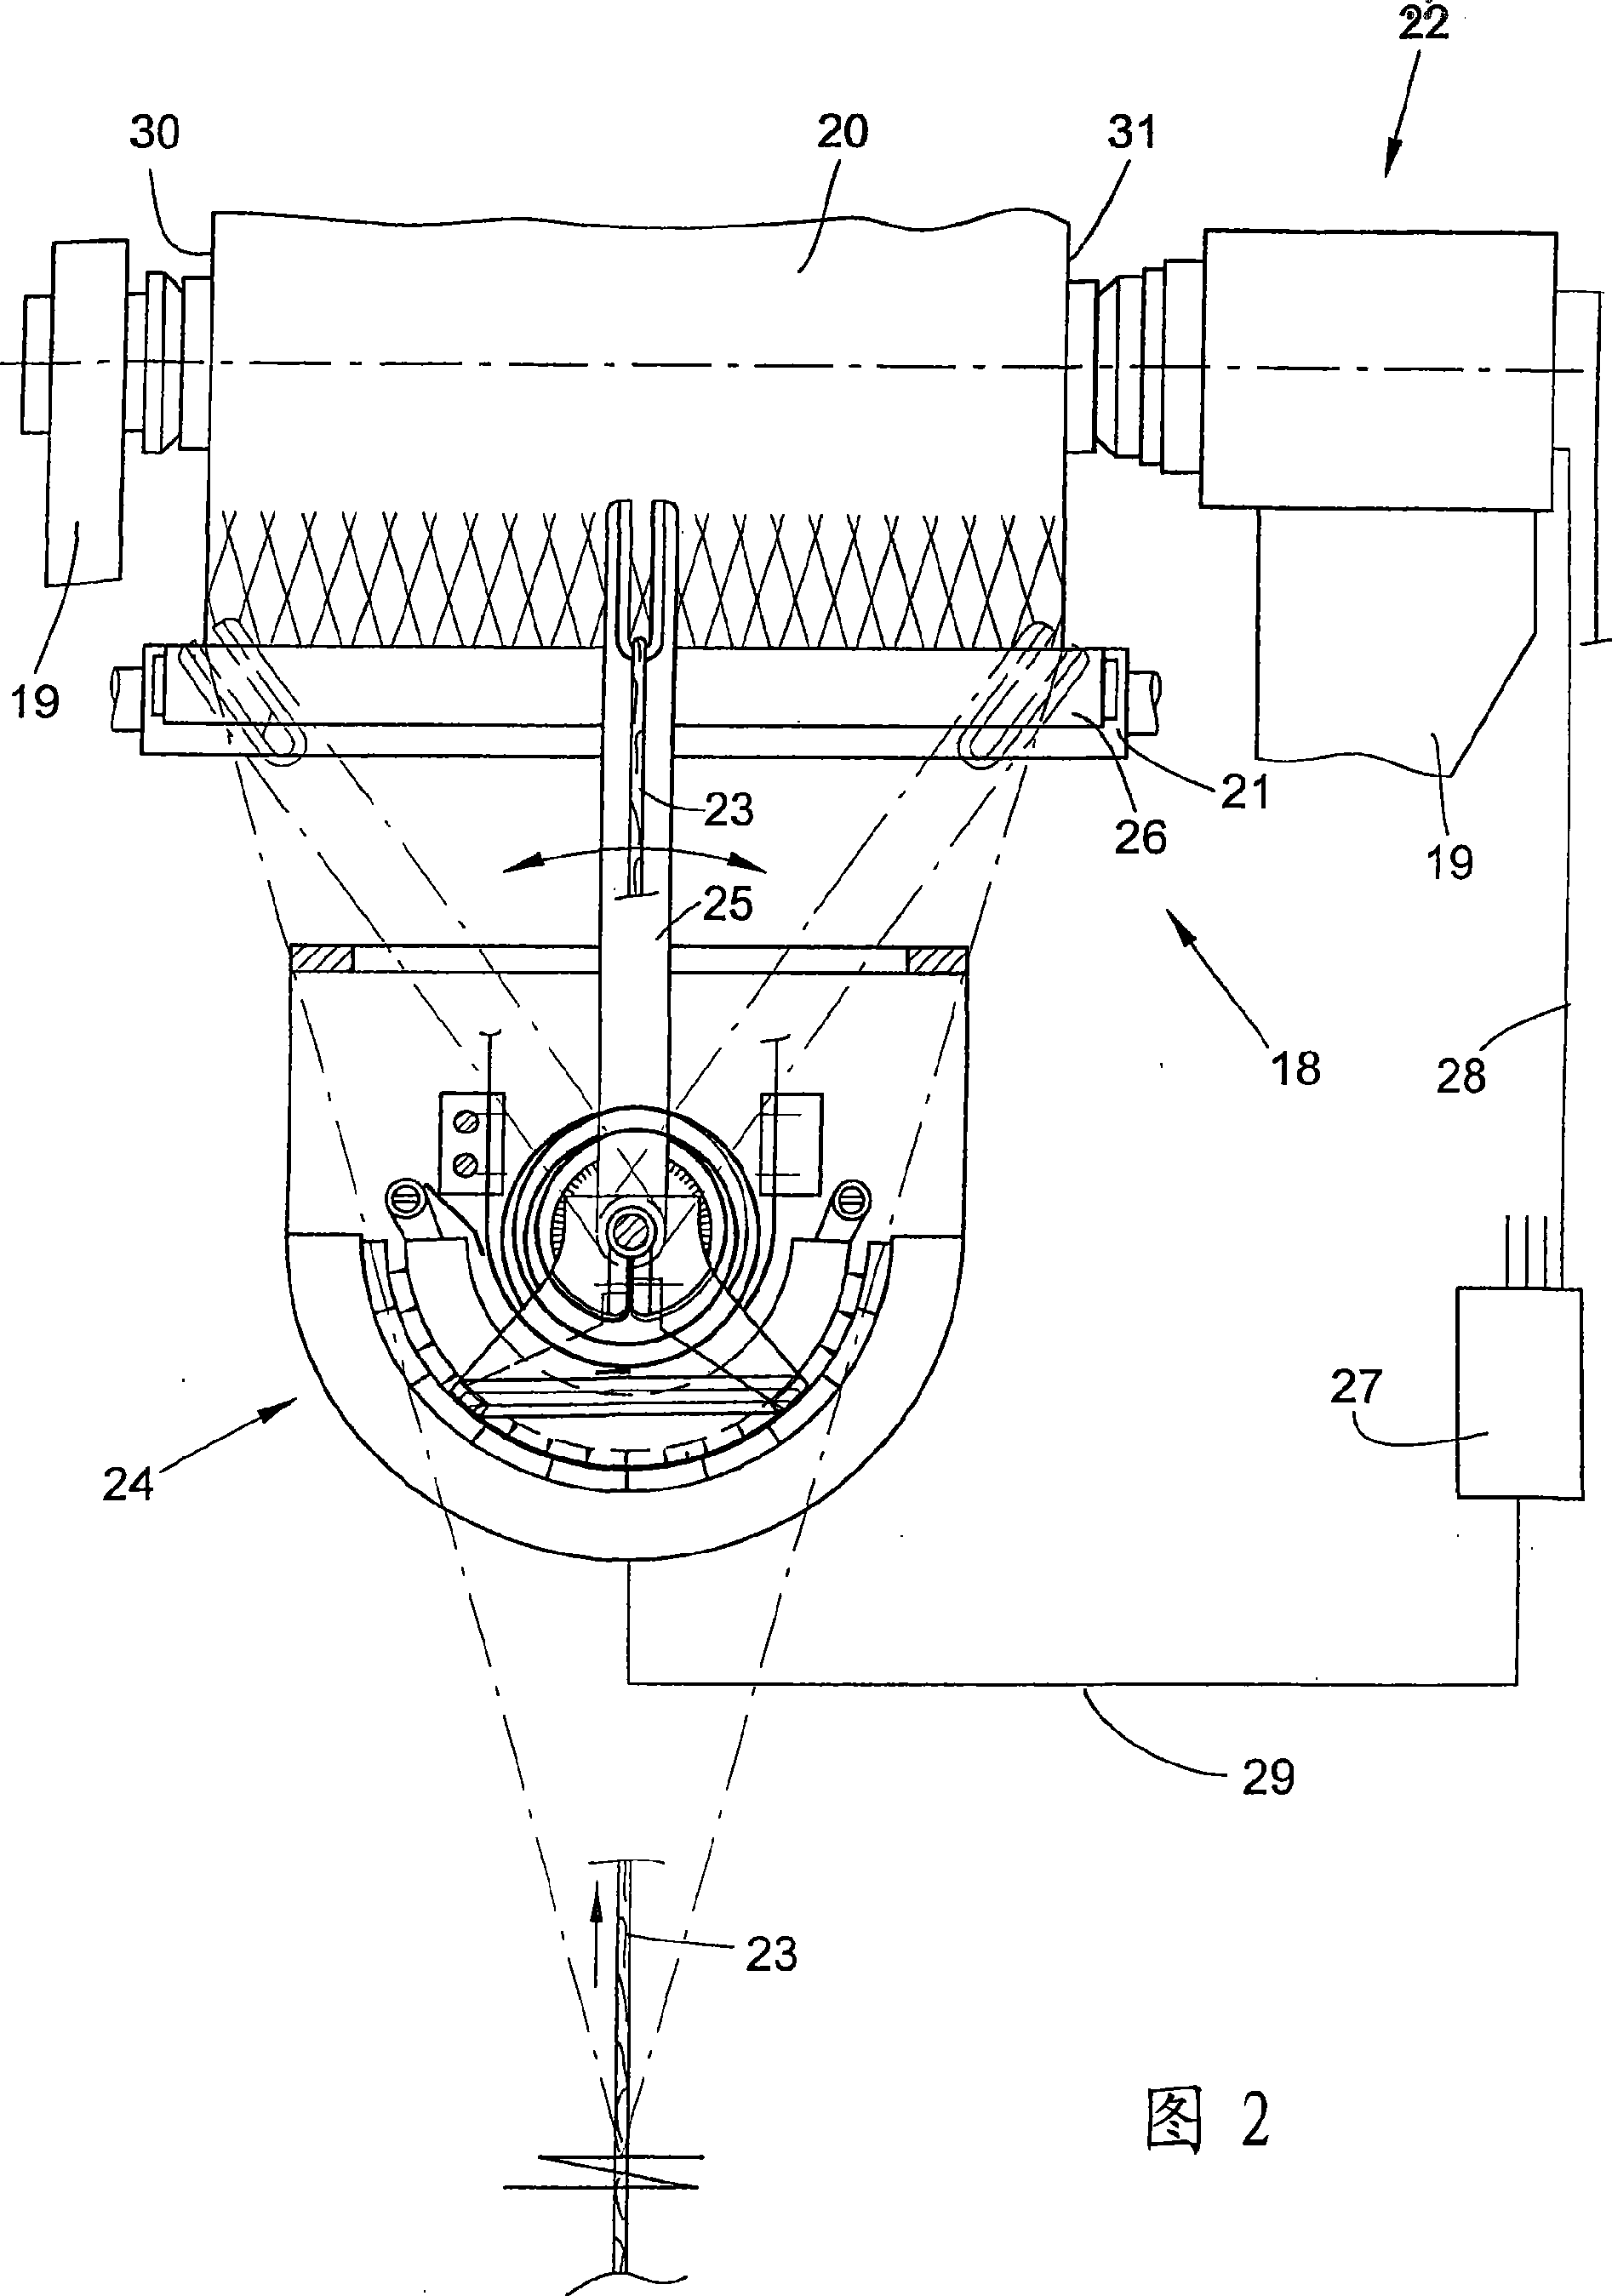 Crosswound bobbin and method for producing such a bobbin